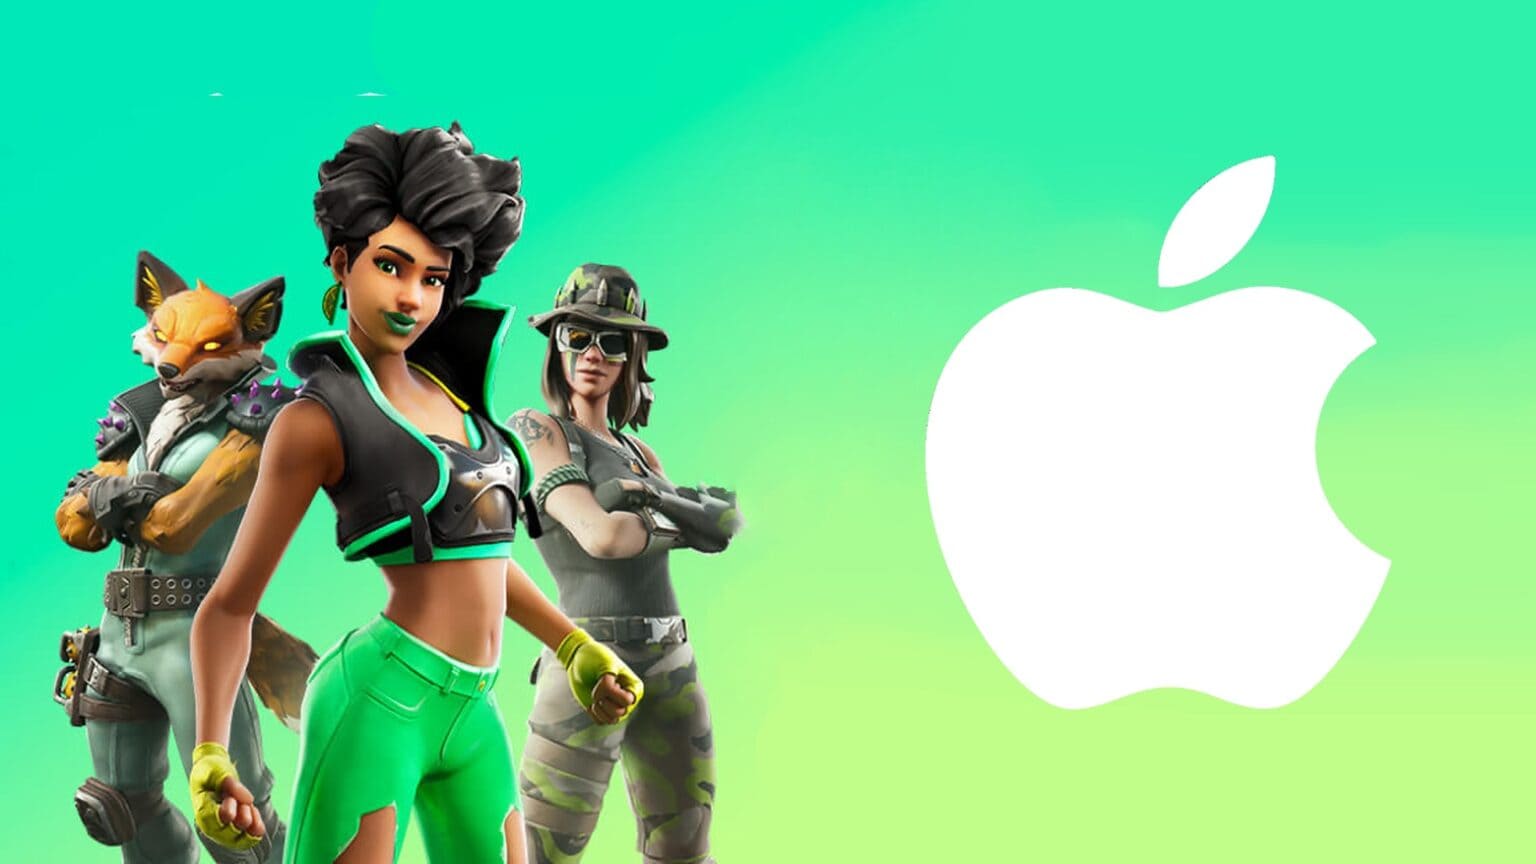 Nvidia cloud gaming could bring 'Fortnite' back to iPhone